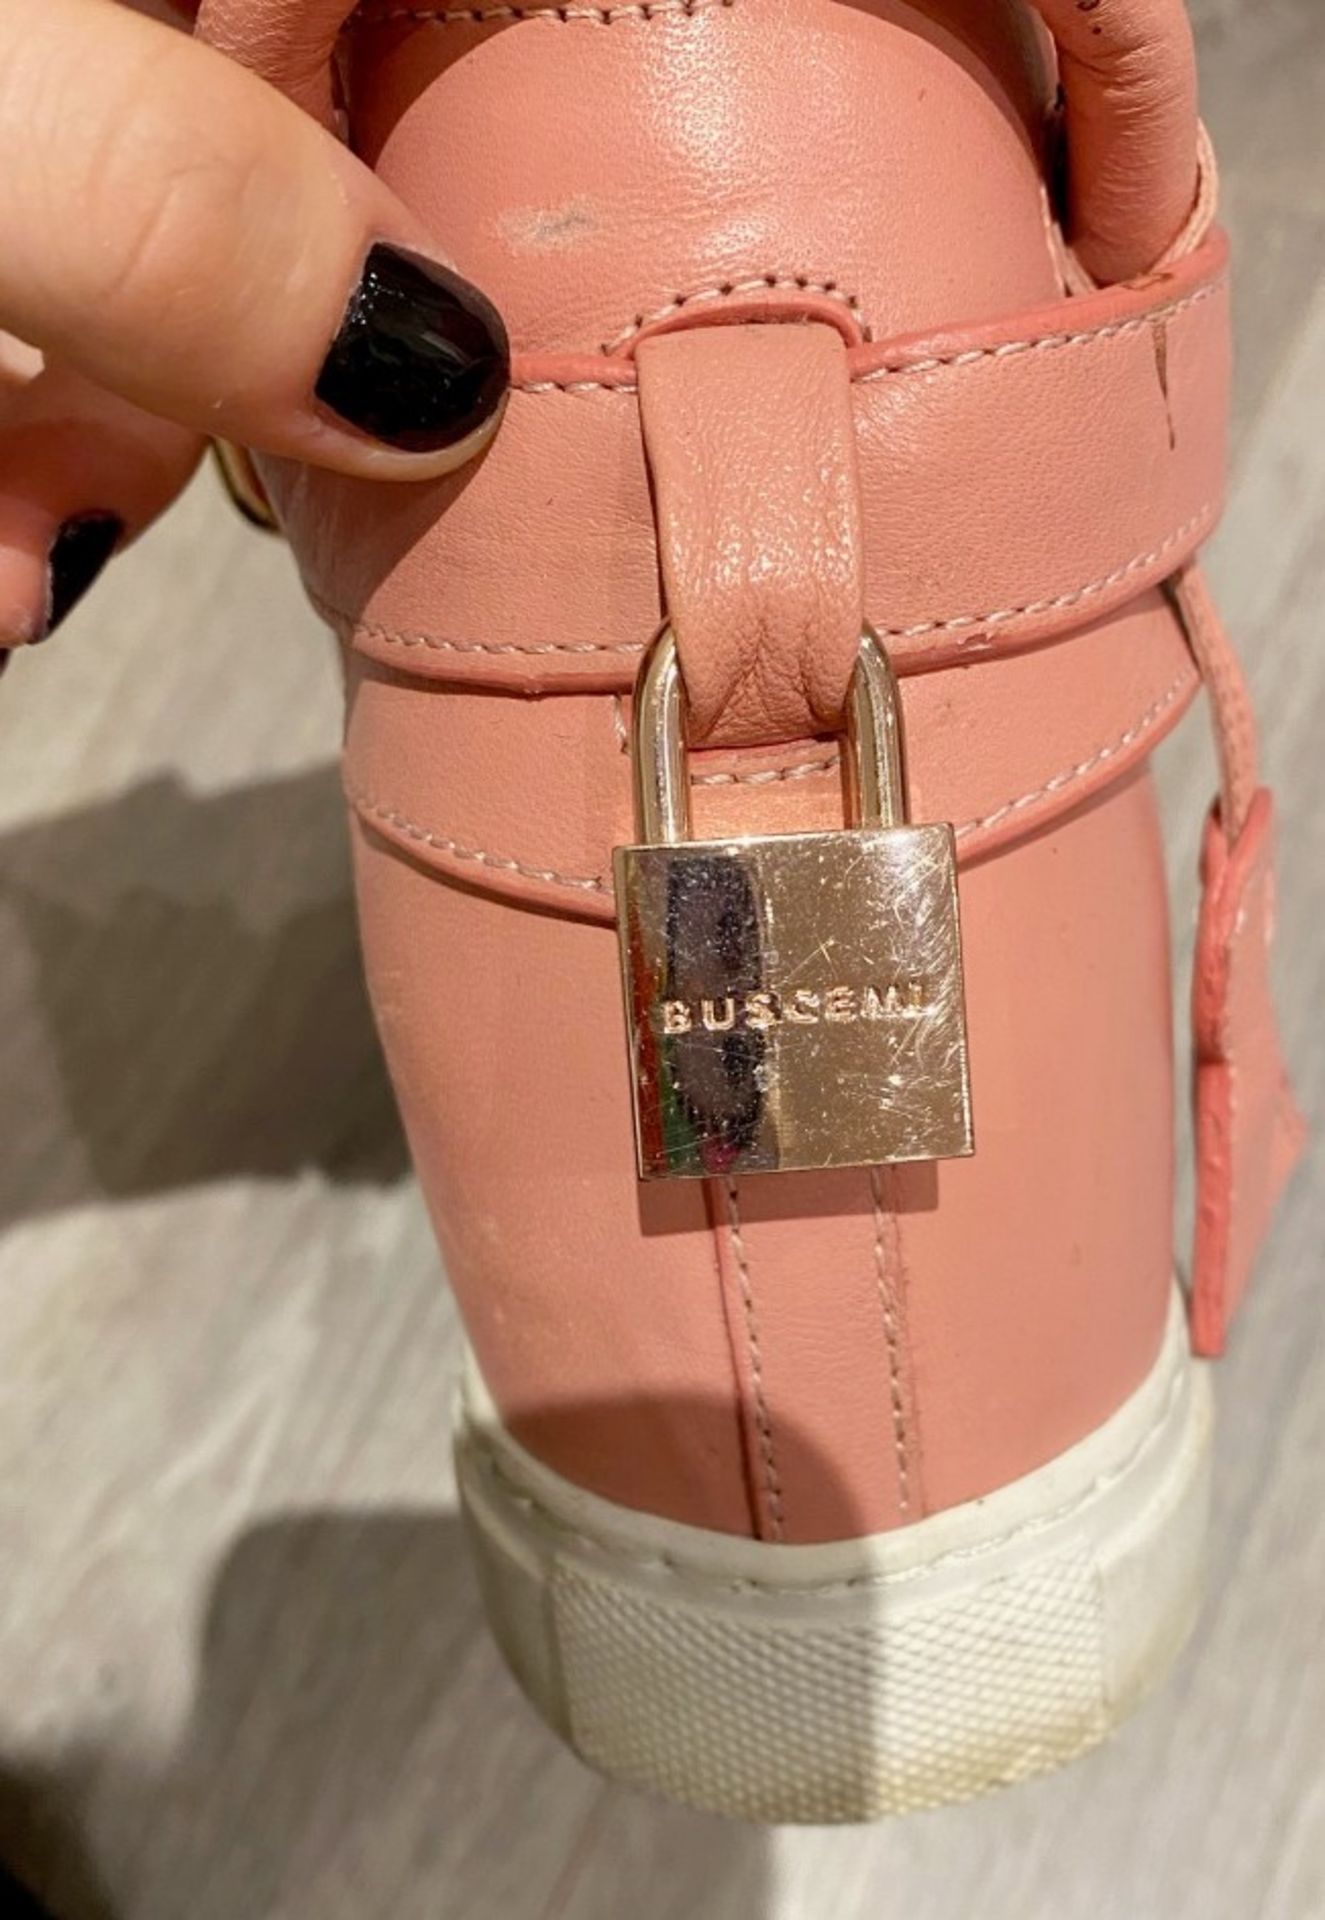 1 x Pair Of Genuine Buscemi Sneakers In Pink - Size: 36 - Preowned in Worn Condition - Ref: LOT22 - - Image 2 of 5